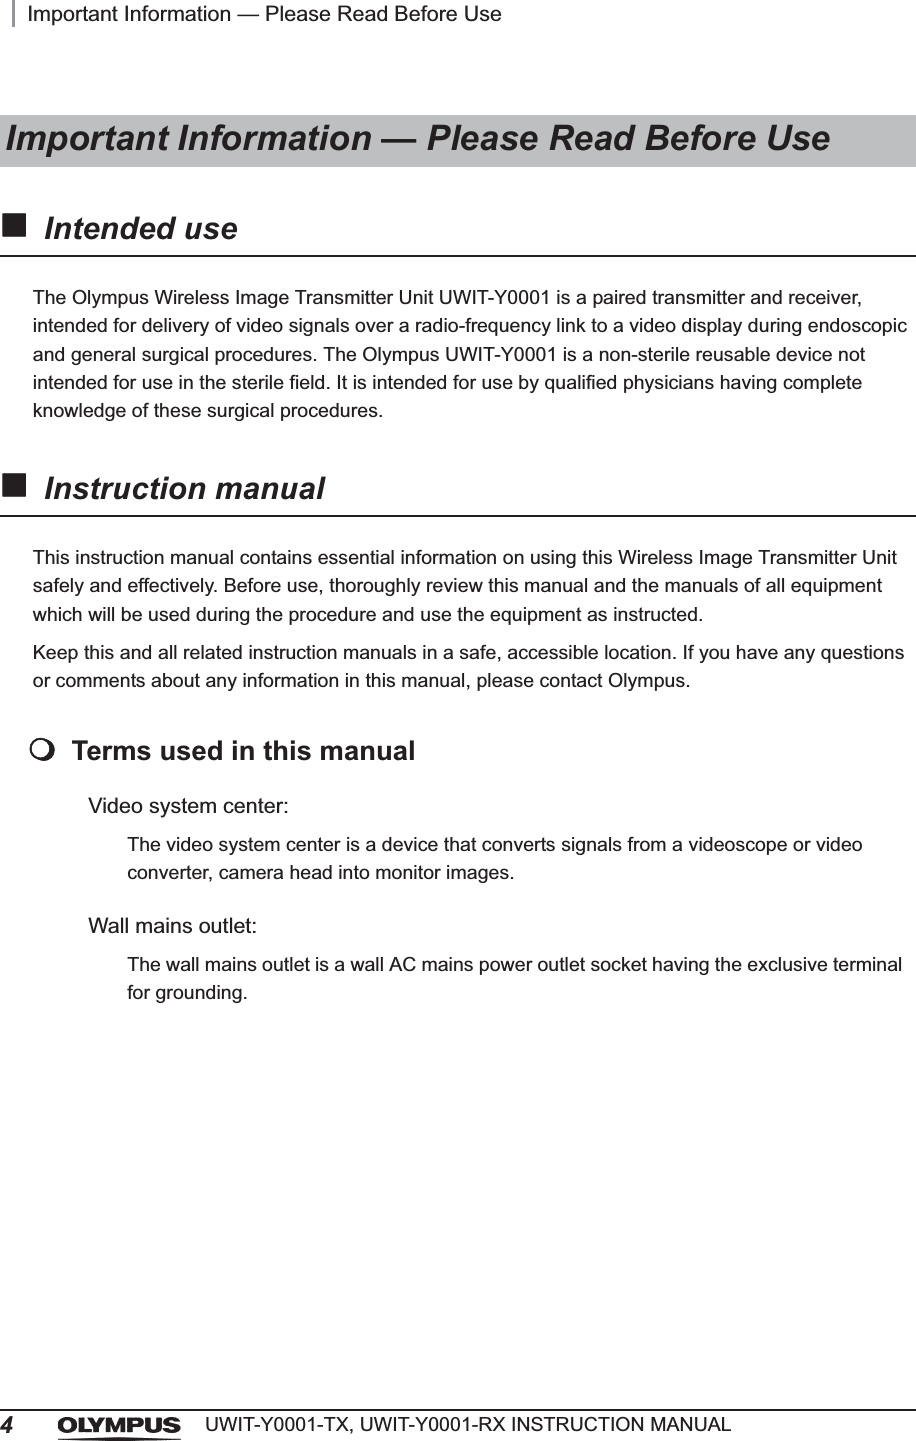 4Important Information — Please Read Before UseUWIT-Y0001-TX, UWIT-Y0001-RX INSTRUCTION MANUALIntended useThe Olympus Wireless Image Transmitter Unit UWIT-Y0001 is a paired transmitter and receiver, intended for delivery of video signals over a radio-frequency link to a video display during endoscopic and general surgical procedures. The Olympus UWIT-Y0001 is a non-sterile reusable device not intended for use in the sterile field. It is intended for use by qualified physicians having complete knowledge of these surgical procedures.Instruction manualThis instruction manual contains essential information on using this Wireless Image Transmitter Unit safely and effectively. Before use, thoroughly review this manual and the manuals of all equipment which will be used during the procedure and use the equipment as instructed.Keep this and all related instruction manuals in a safe, accessible location. If you have any questions or comments about any information in this manual, please contact Olympus.Terms used in this manualVideo system center:The video system center is a device that converts signals from a videoscope or video converter, camera head into monitor images.Wall mains outlet:The wall mains outlet is a wall AC mains power outlet socket having the exclusive terminal for grounding.Important Information — Please Read Before Use